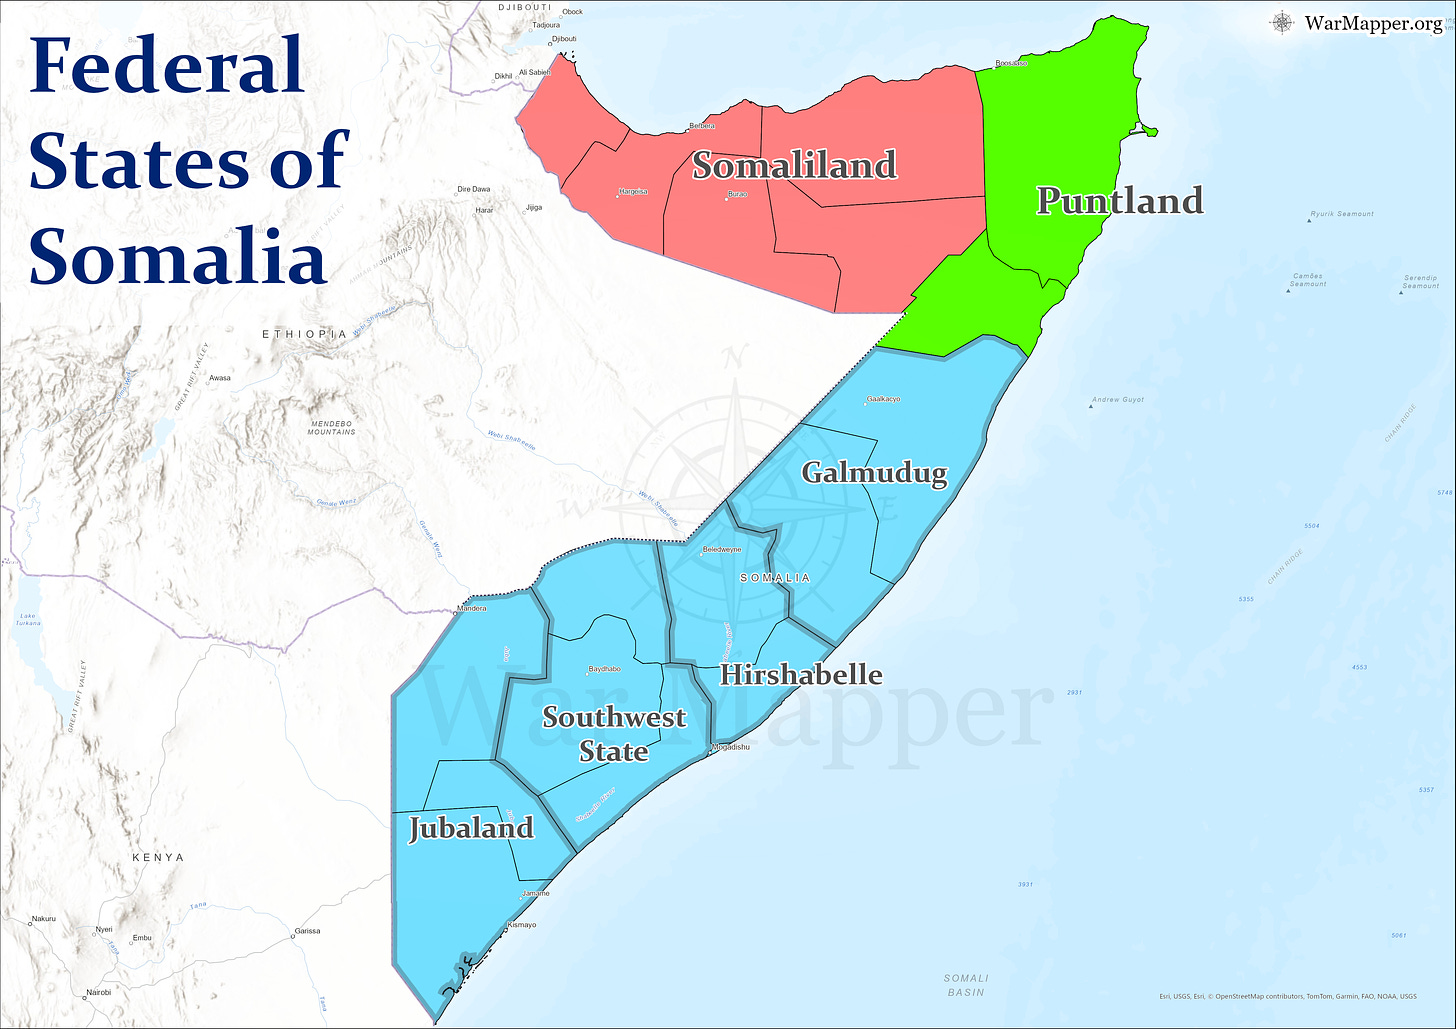 A map showing the federal states of somalia.